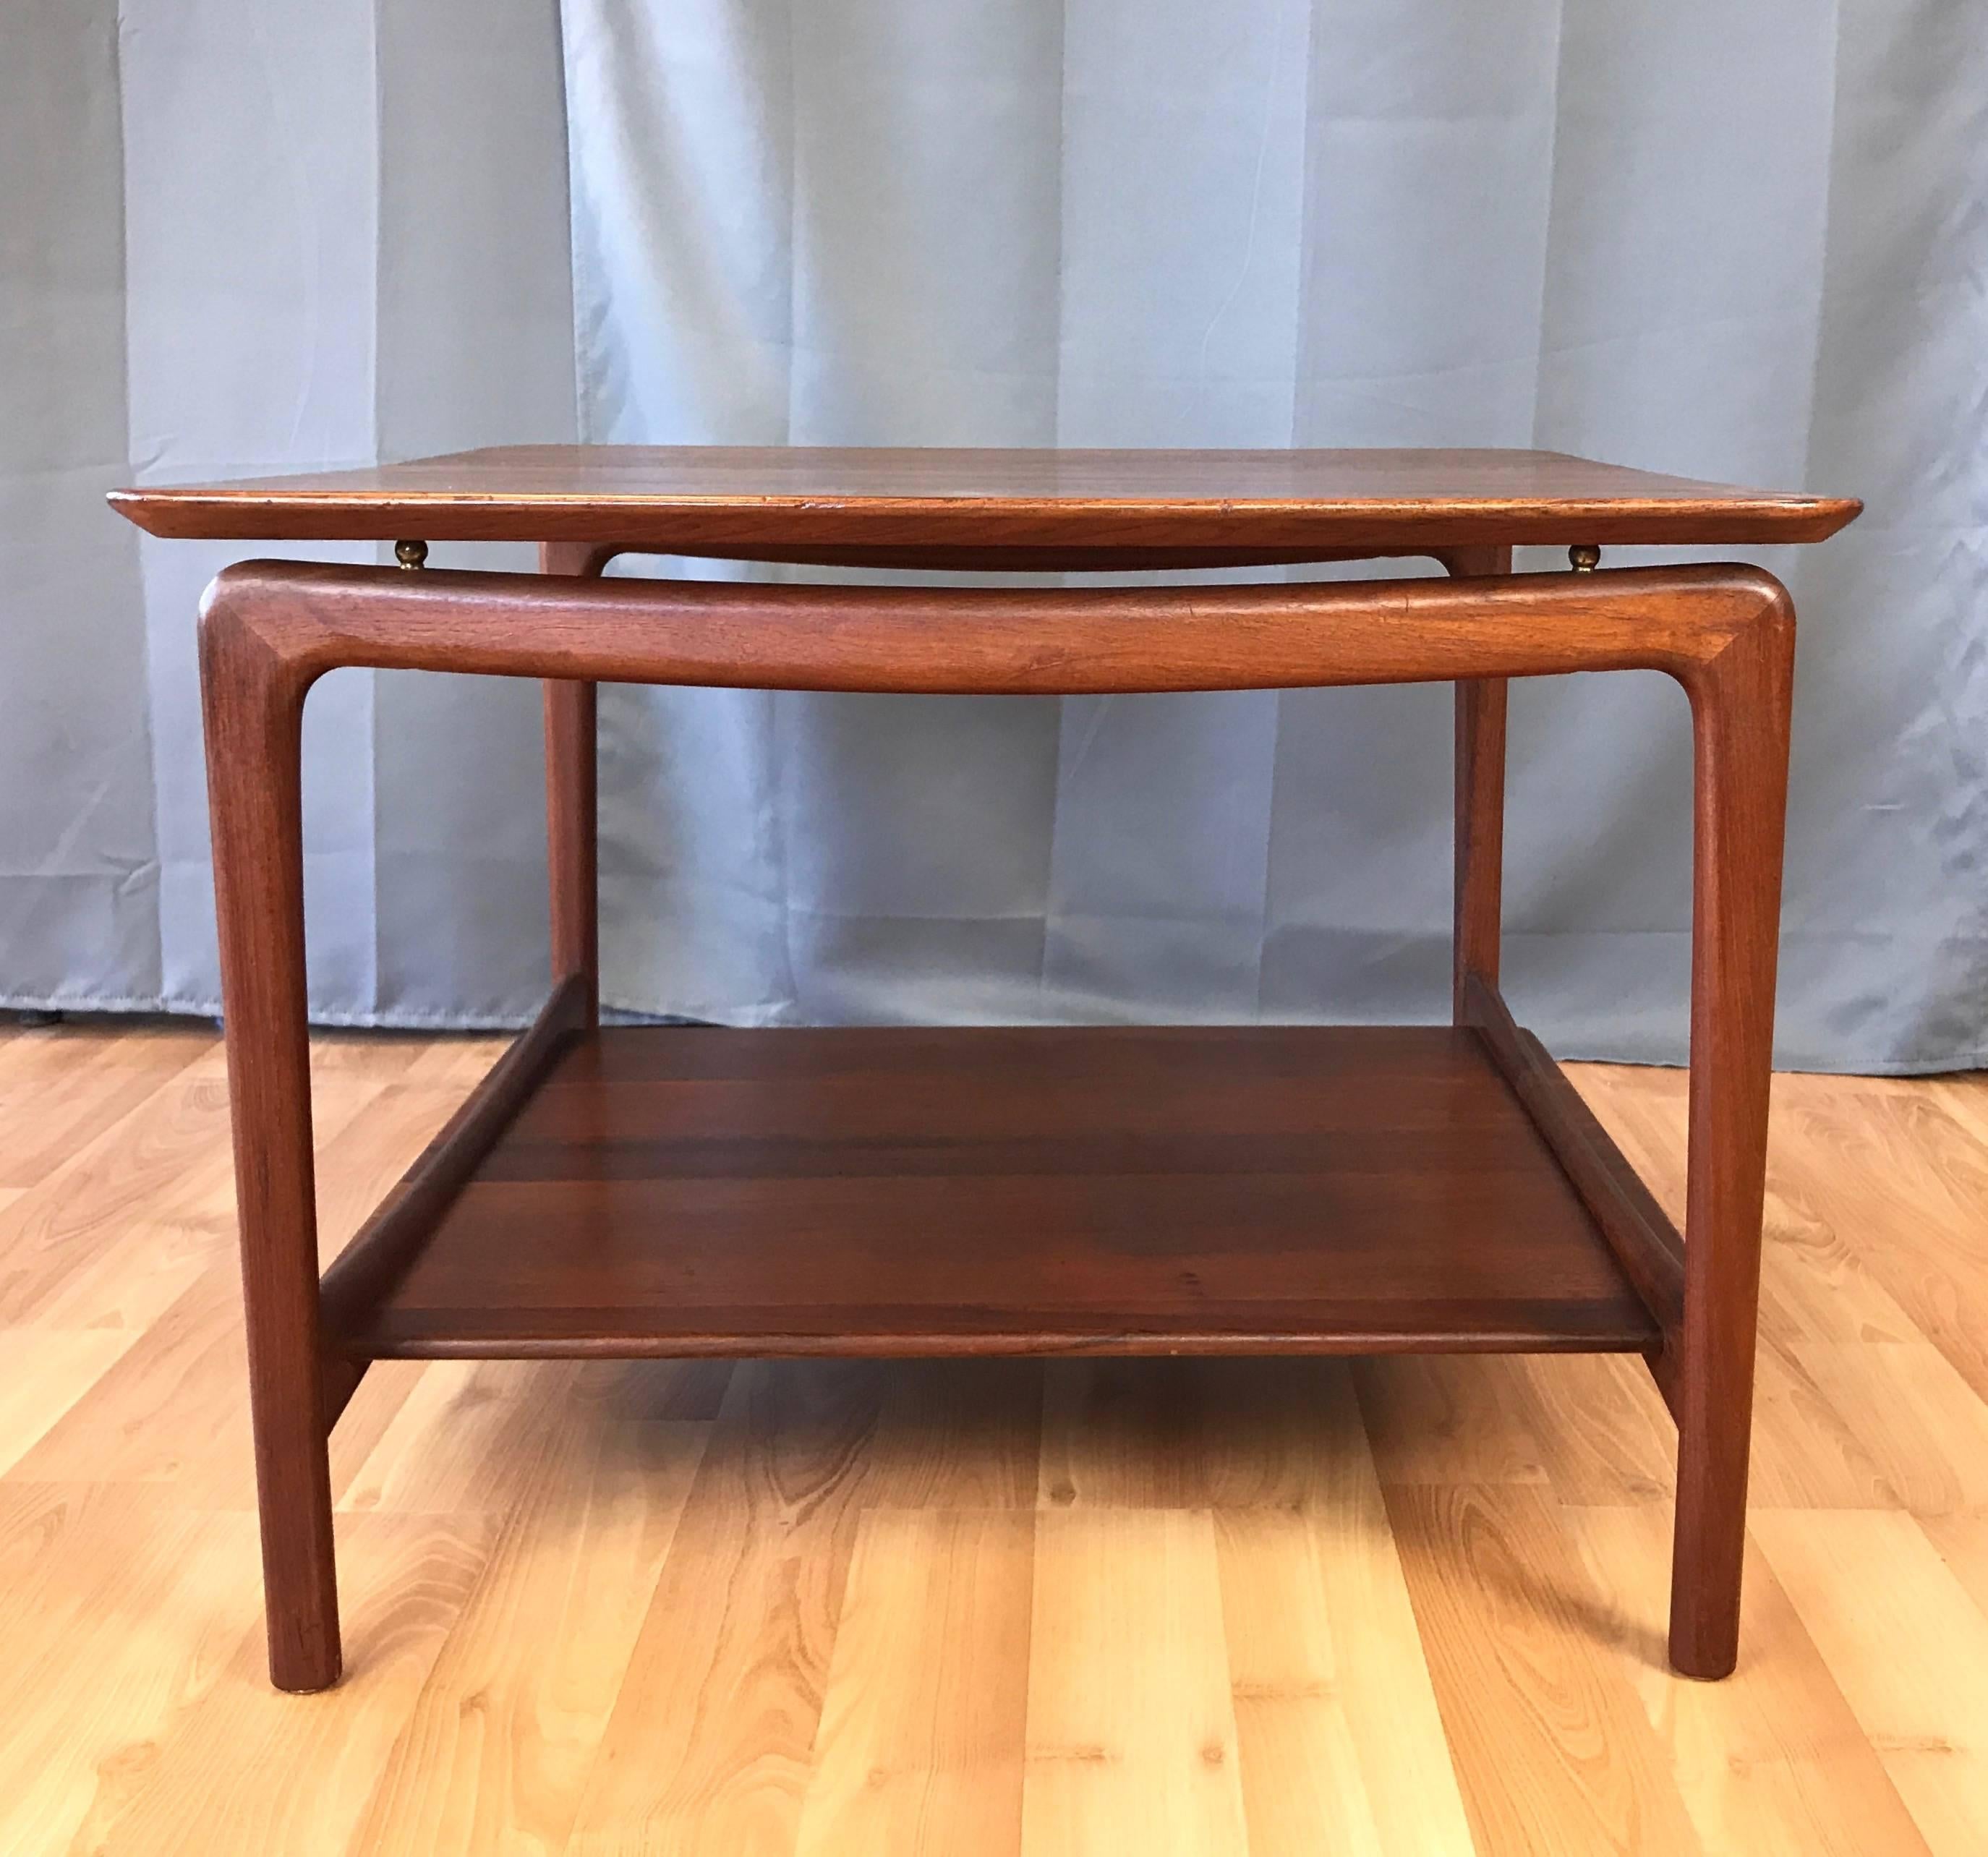 A midcentury Danish floating top teak side or coffee table by Peter Hvidt and Orla Mølgaard-Nielsen for France & Daverkosen, and originally retailed by John Stuart.

Solid teak knife edge top appears to float above a sculptural solid teak base